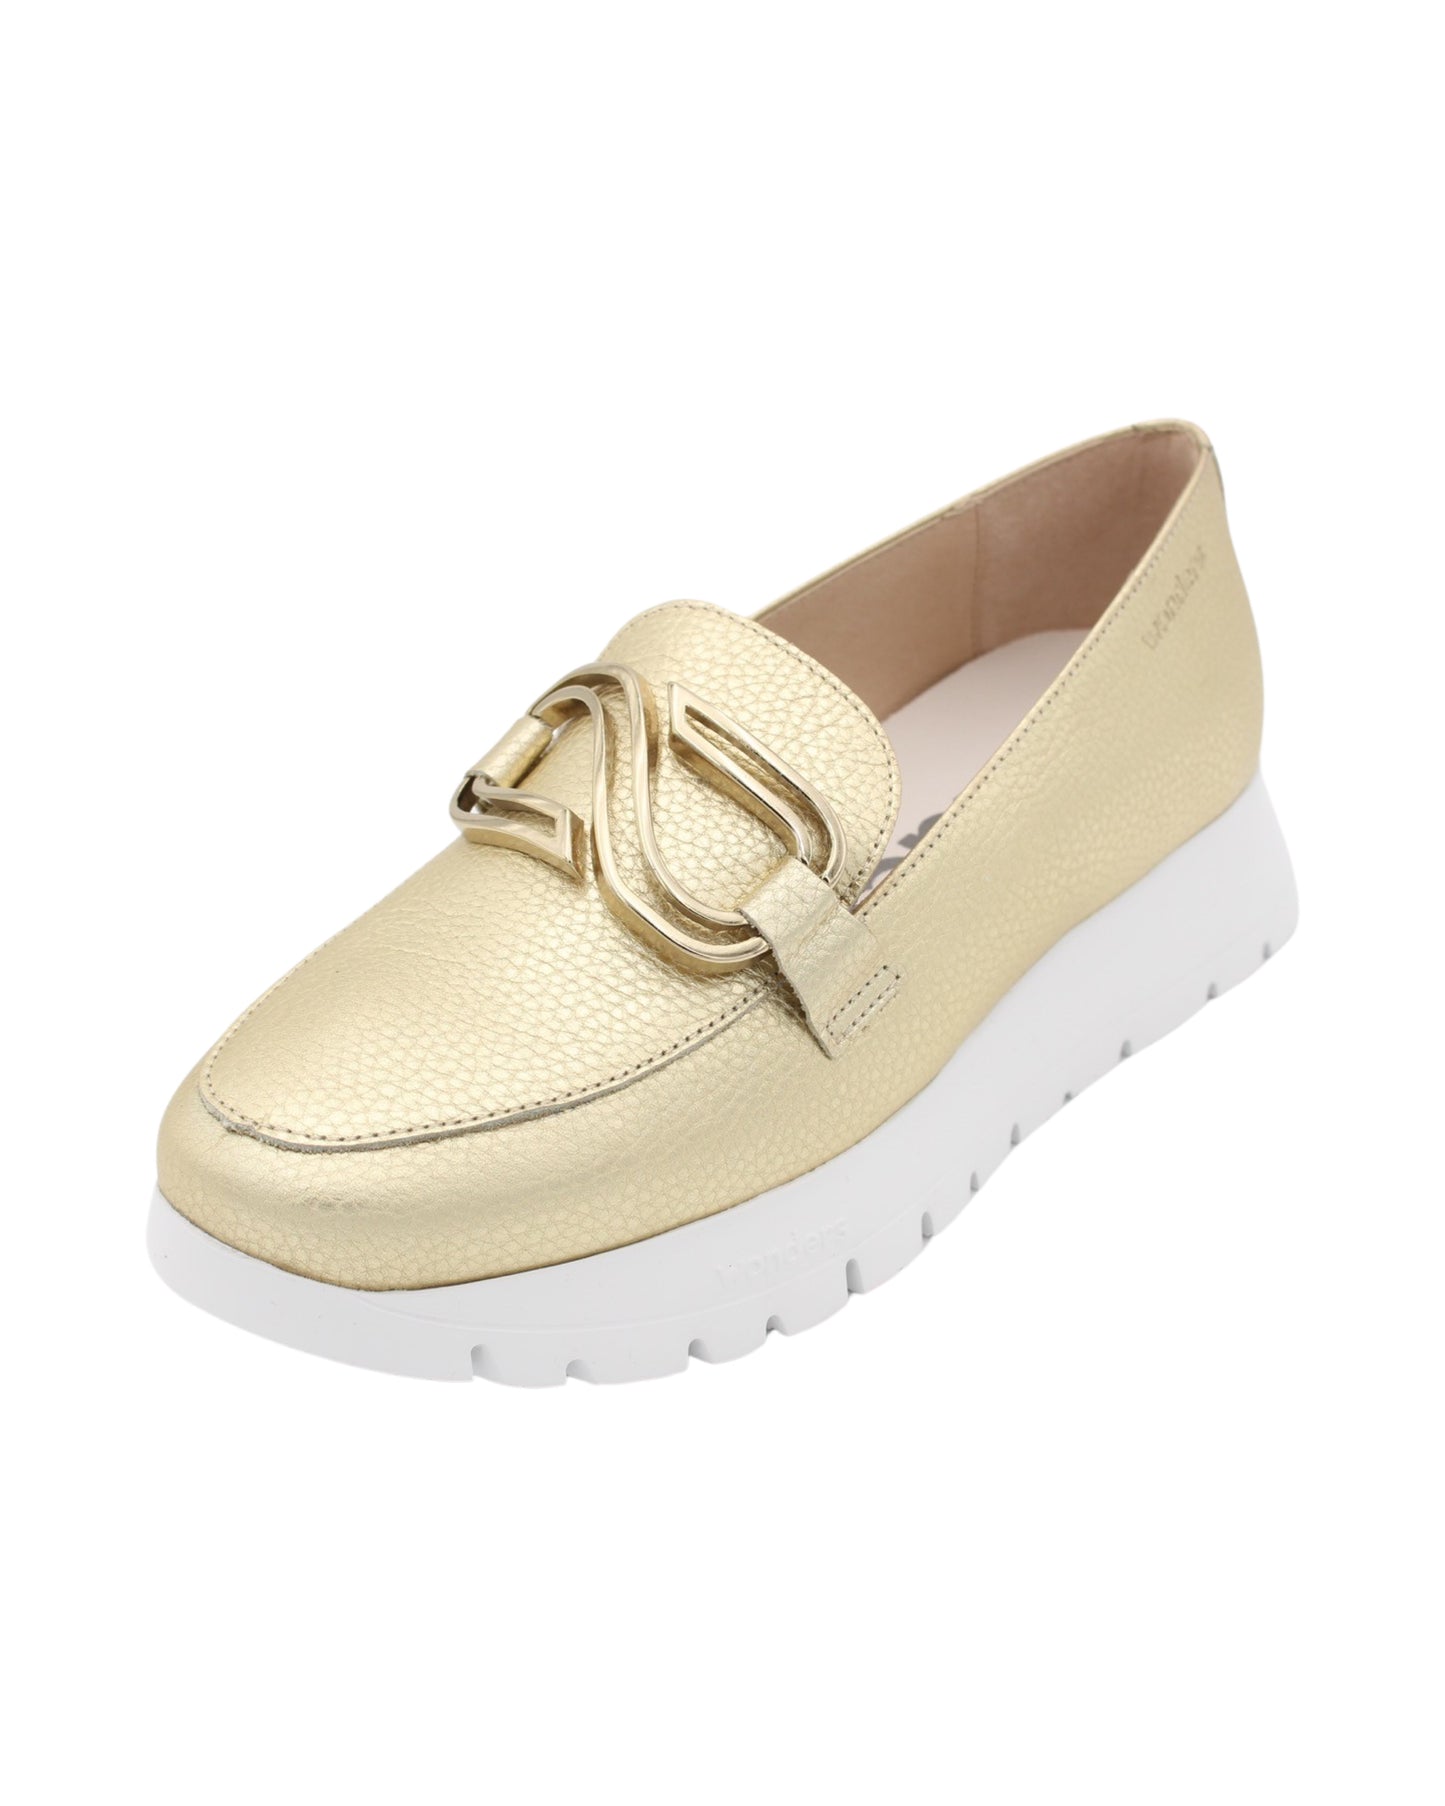 Wonders - Ladies Shoes Loafers Gold (1906)